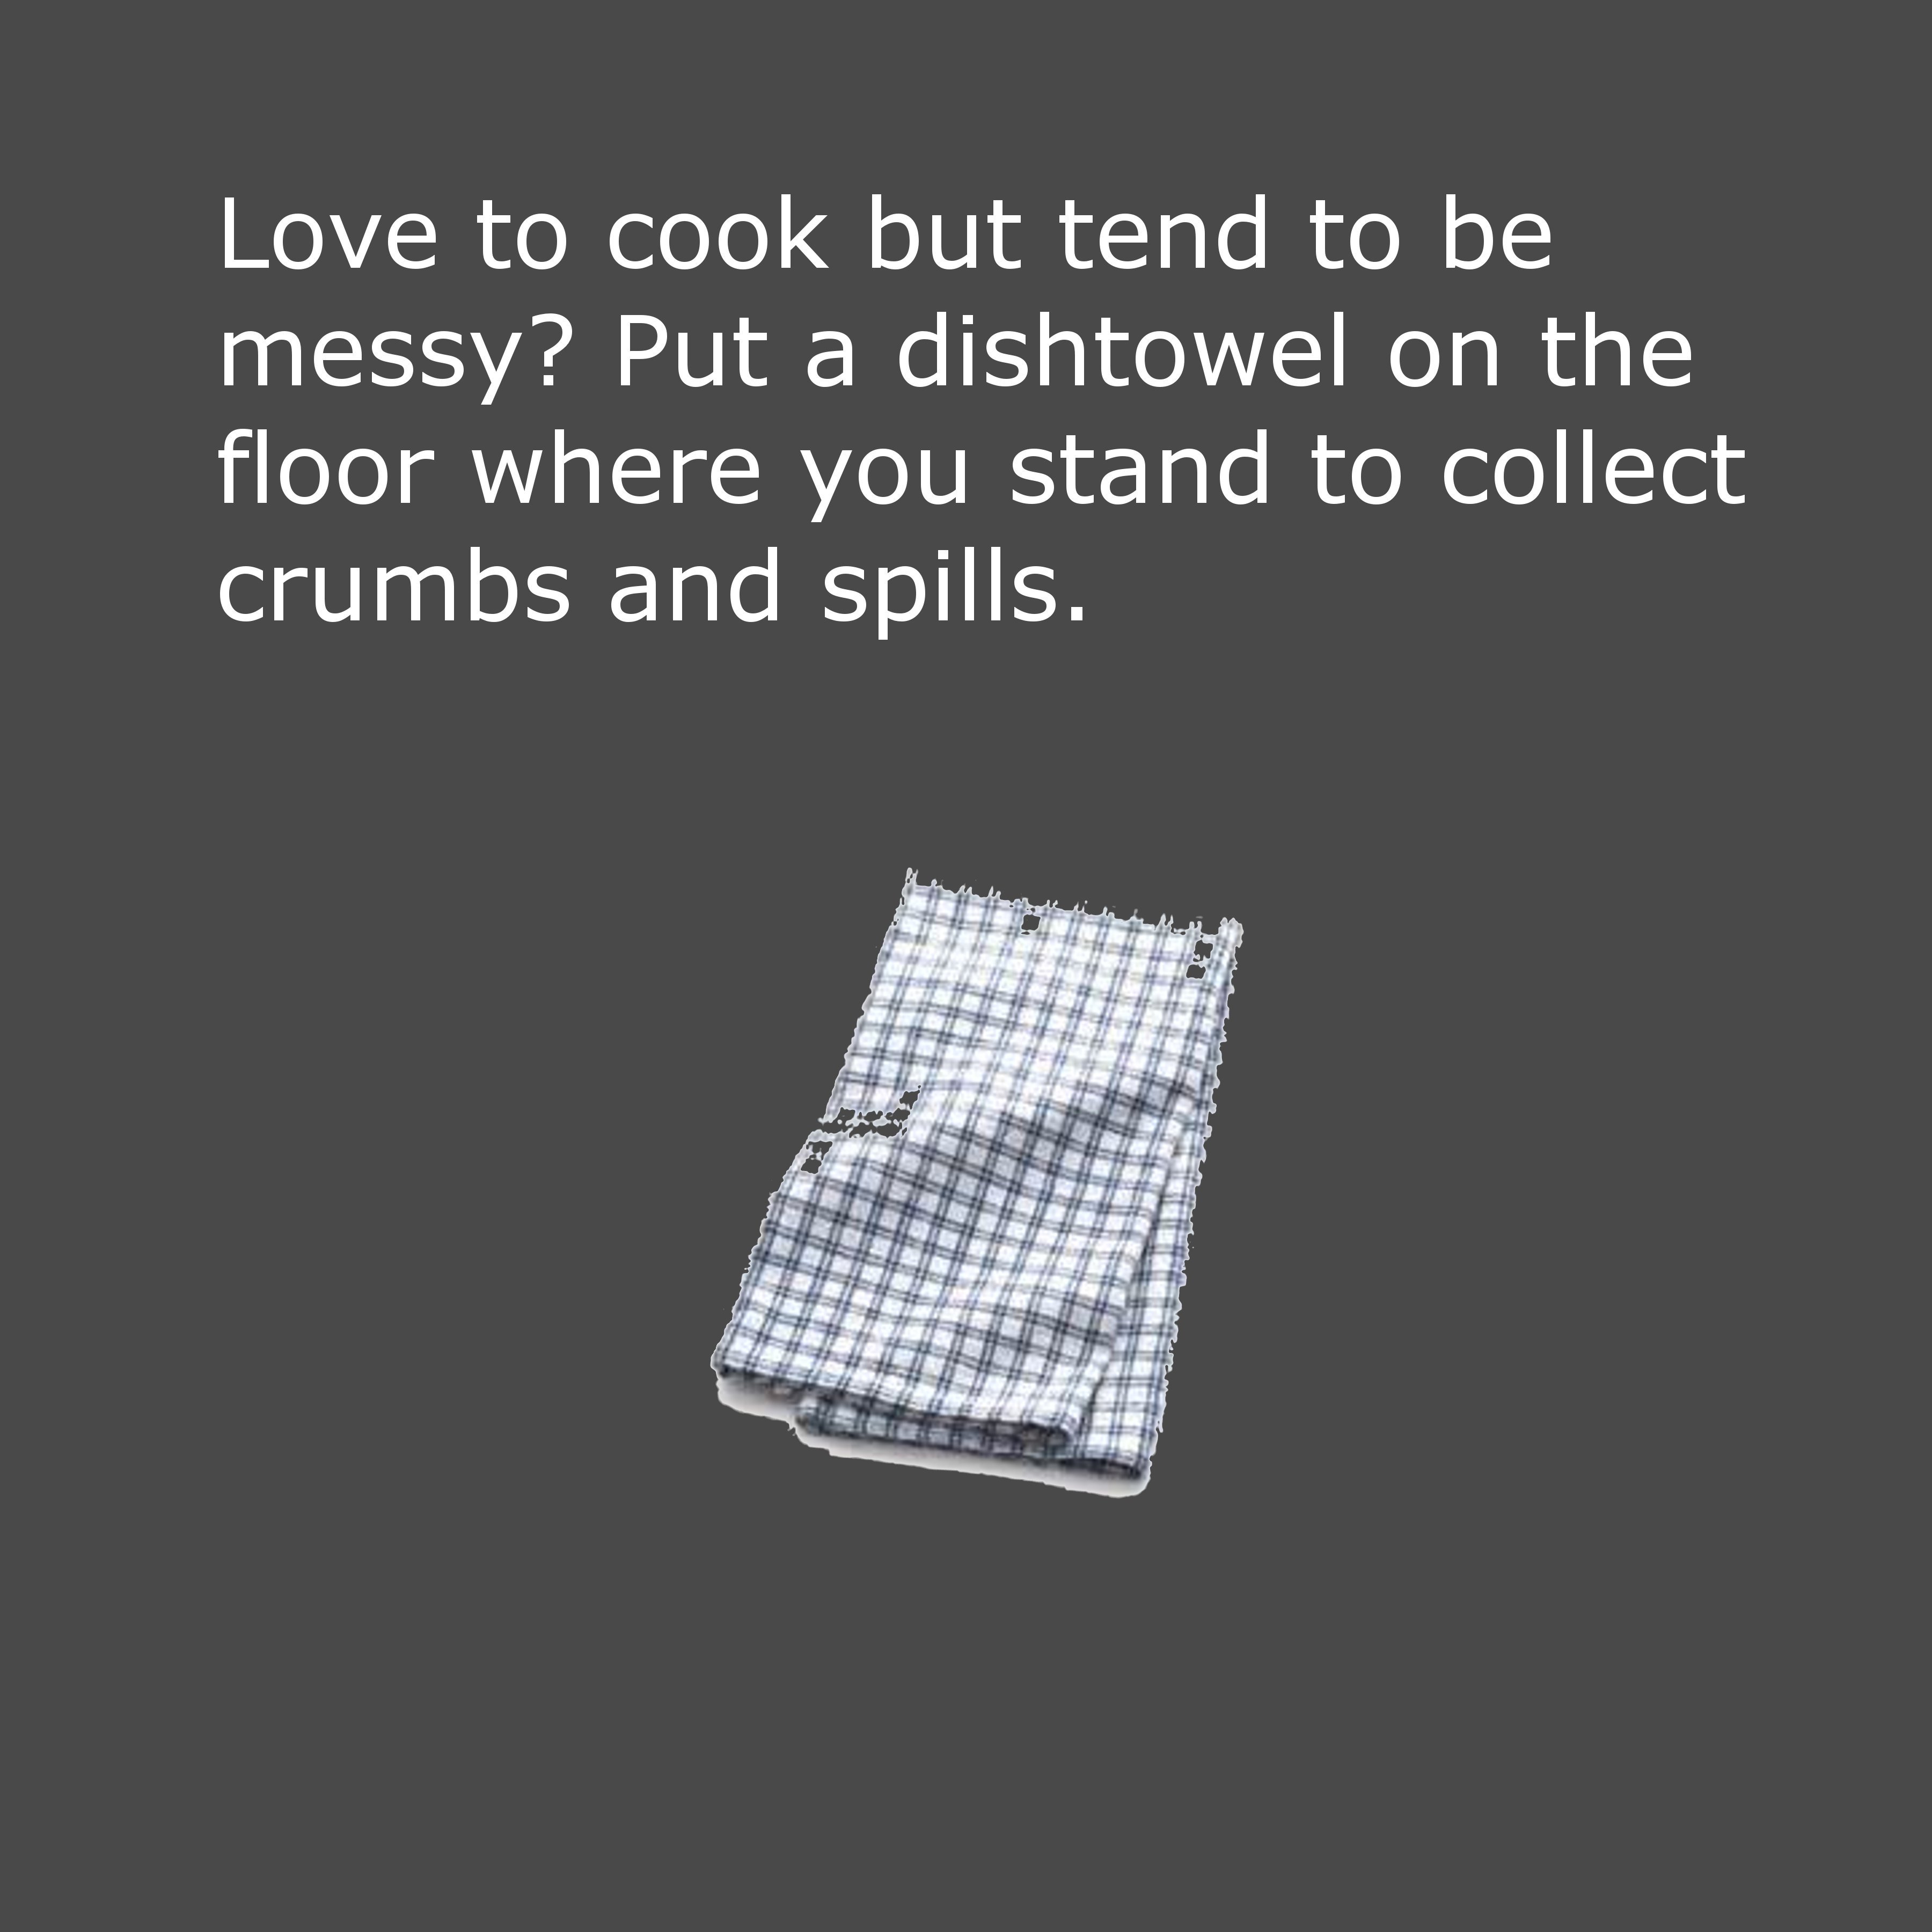 pattern - Love to cook but tend to be messy? Put a dishtowel on the floor where you stand to collect crumbs and spills. M